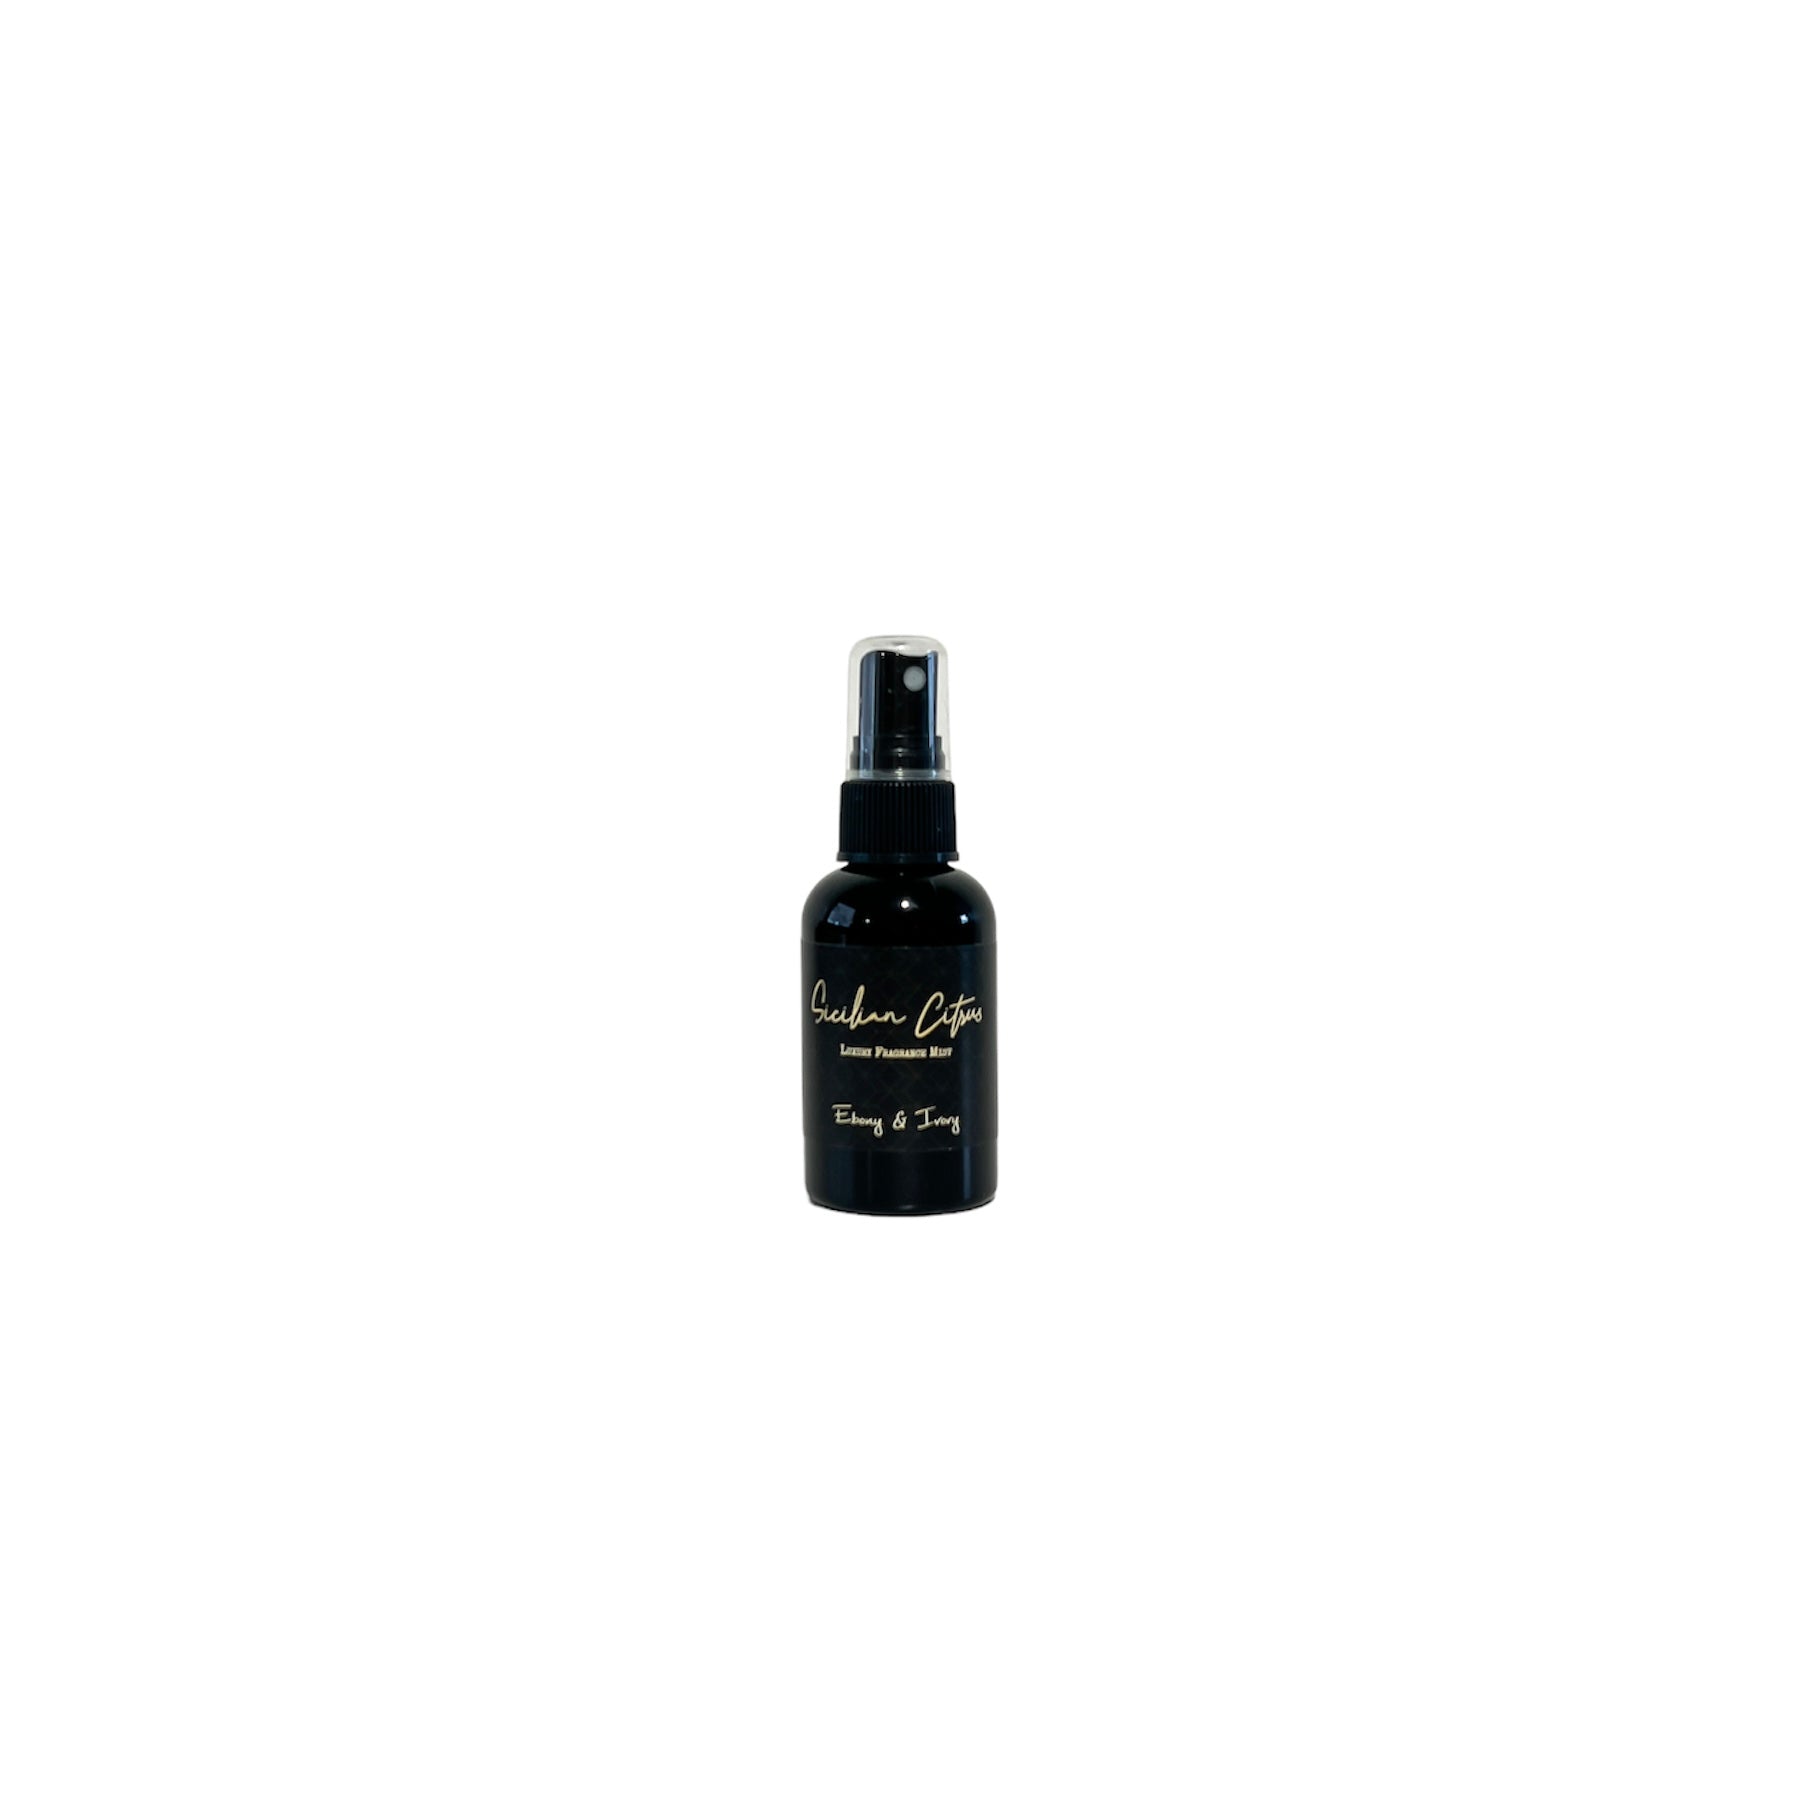 Black, two fluid ounce, bergamot, grapefruit, and fresh greens scented fragrance spray with a black label that reads Sicilian Citrus